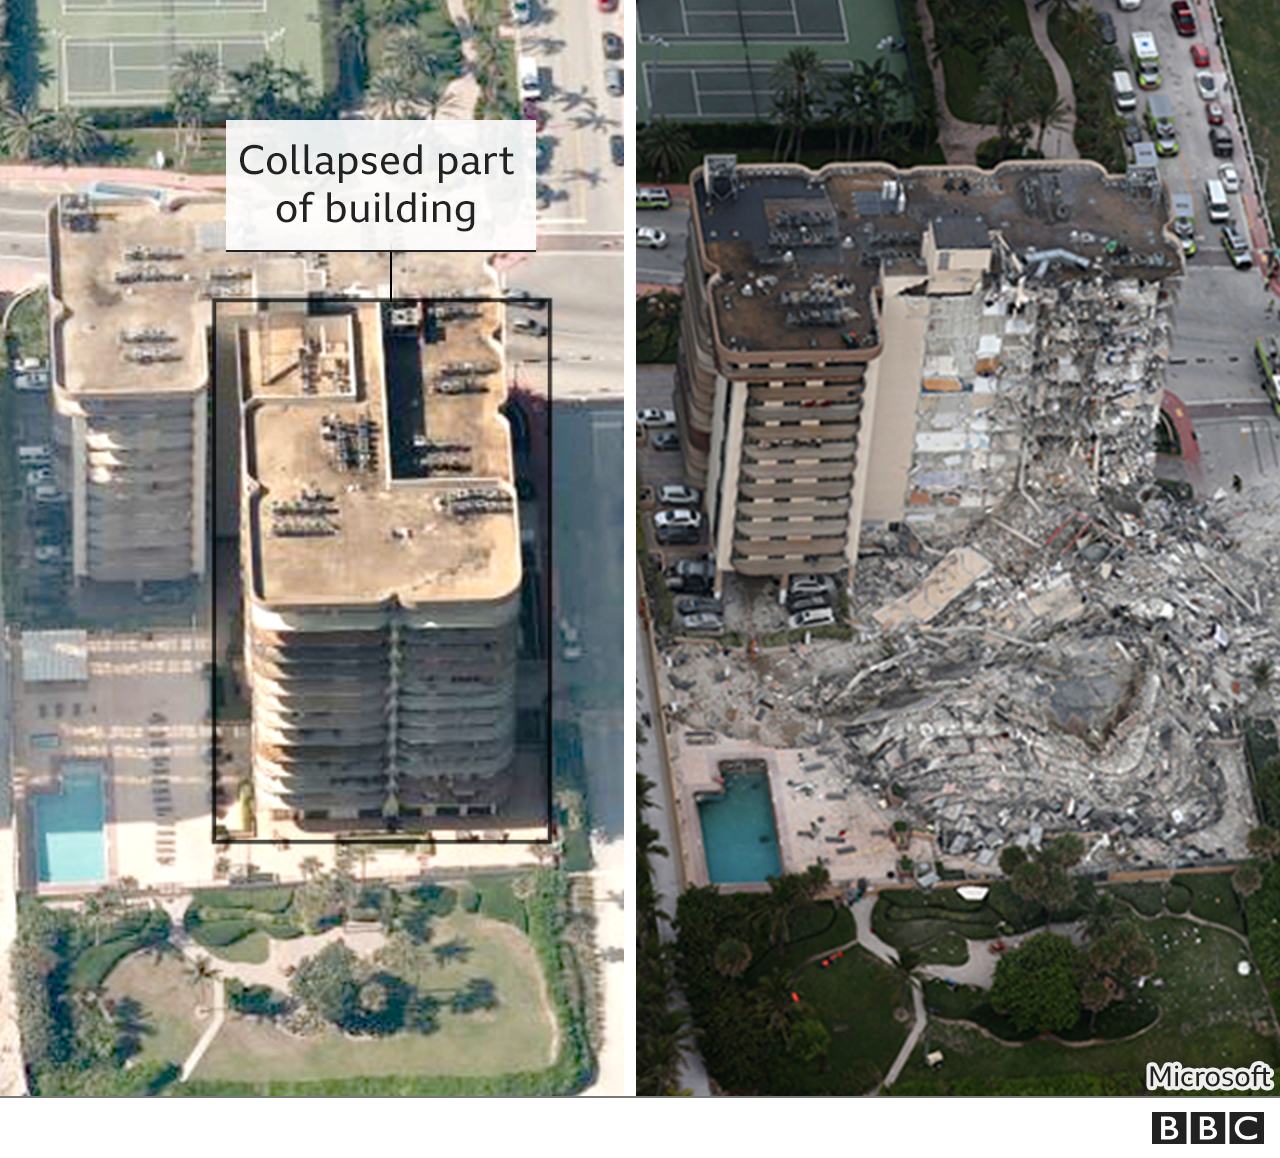 Composite image, comparing before and after part of the building in Surfside, Florida collapsed